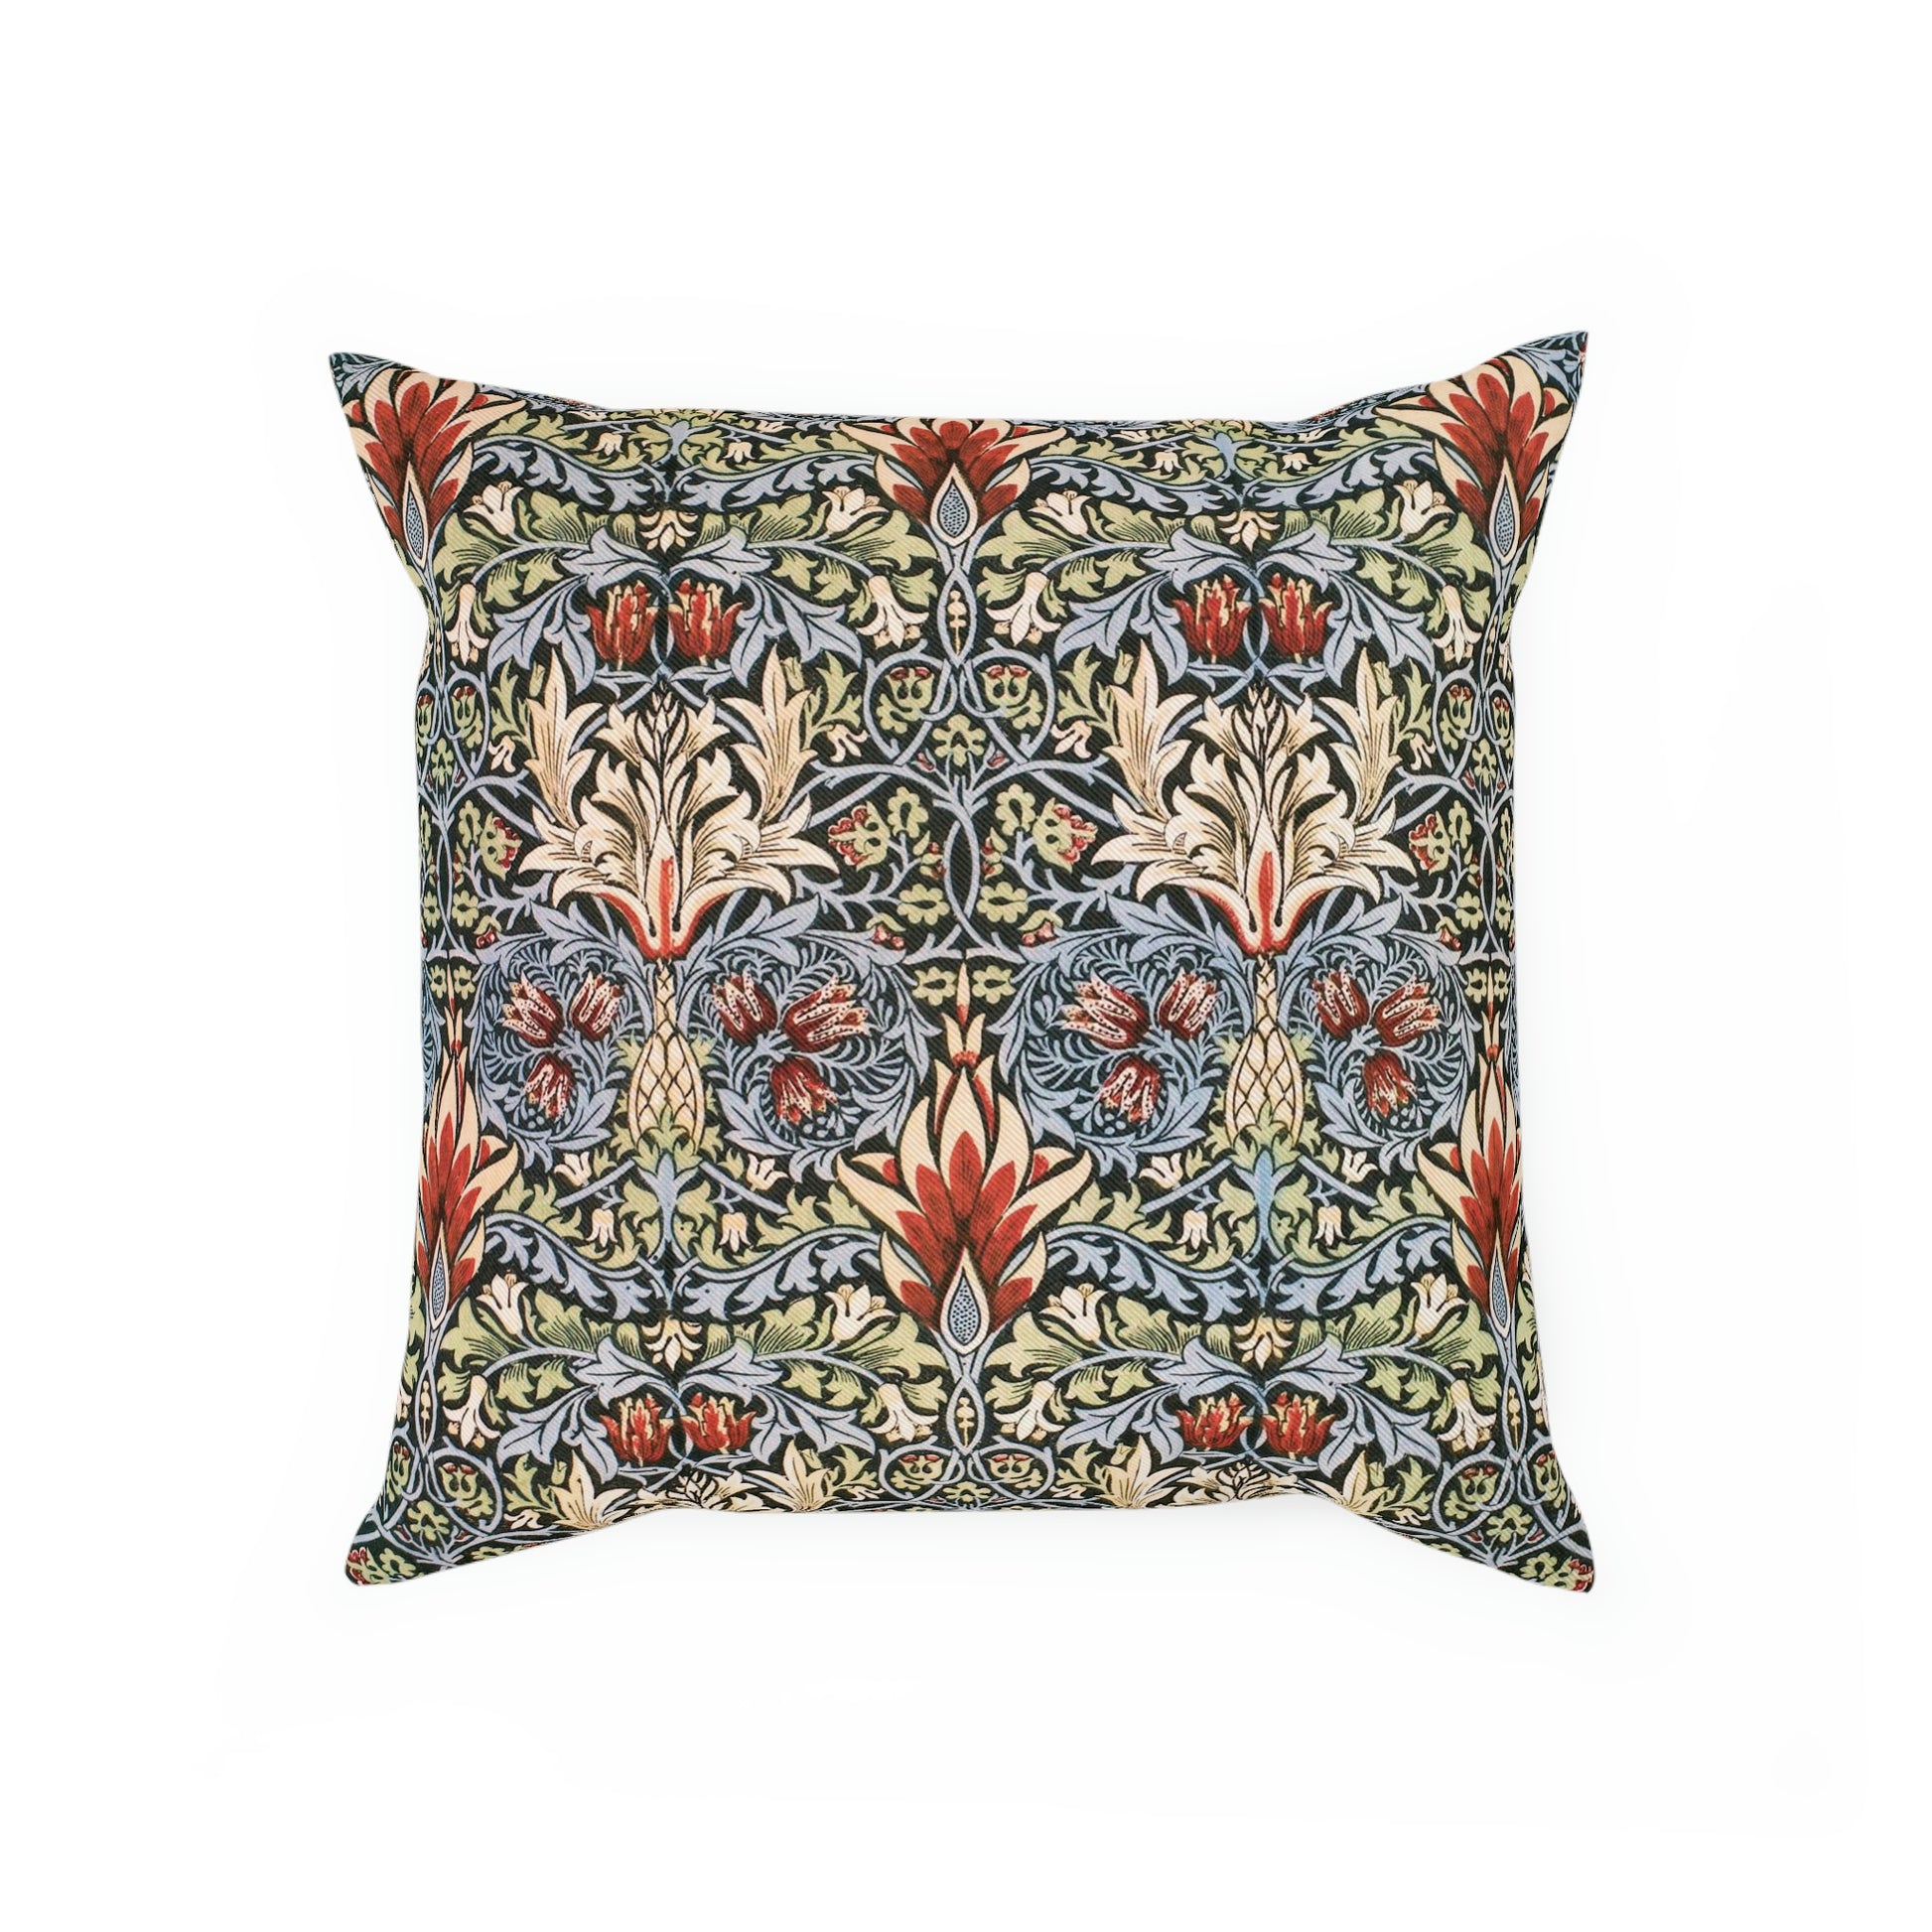 William-Morris-and-Co-Cushion-and-Cushion-Cover-Snakeshead-Collection-6